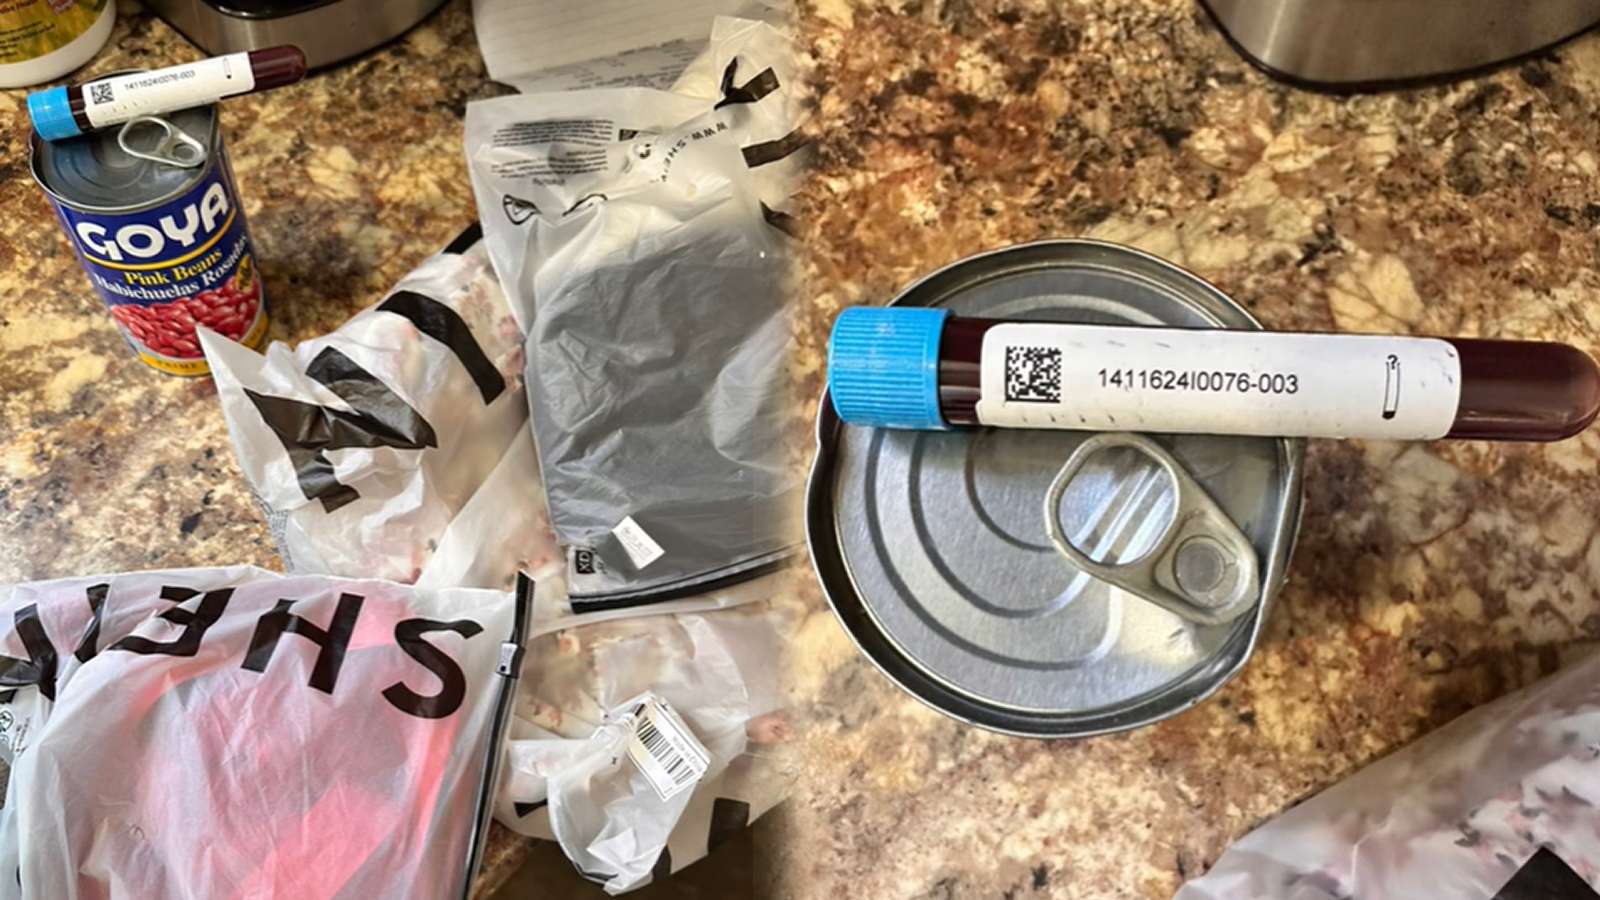 Shein customer mortified after FedEx delivers order with 'vial of human blood'